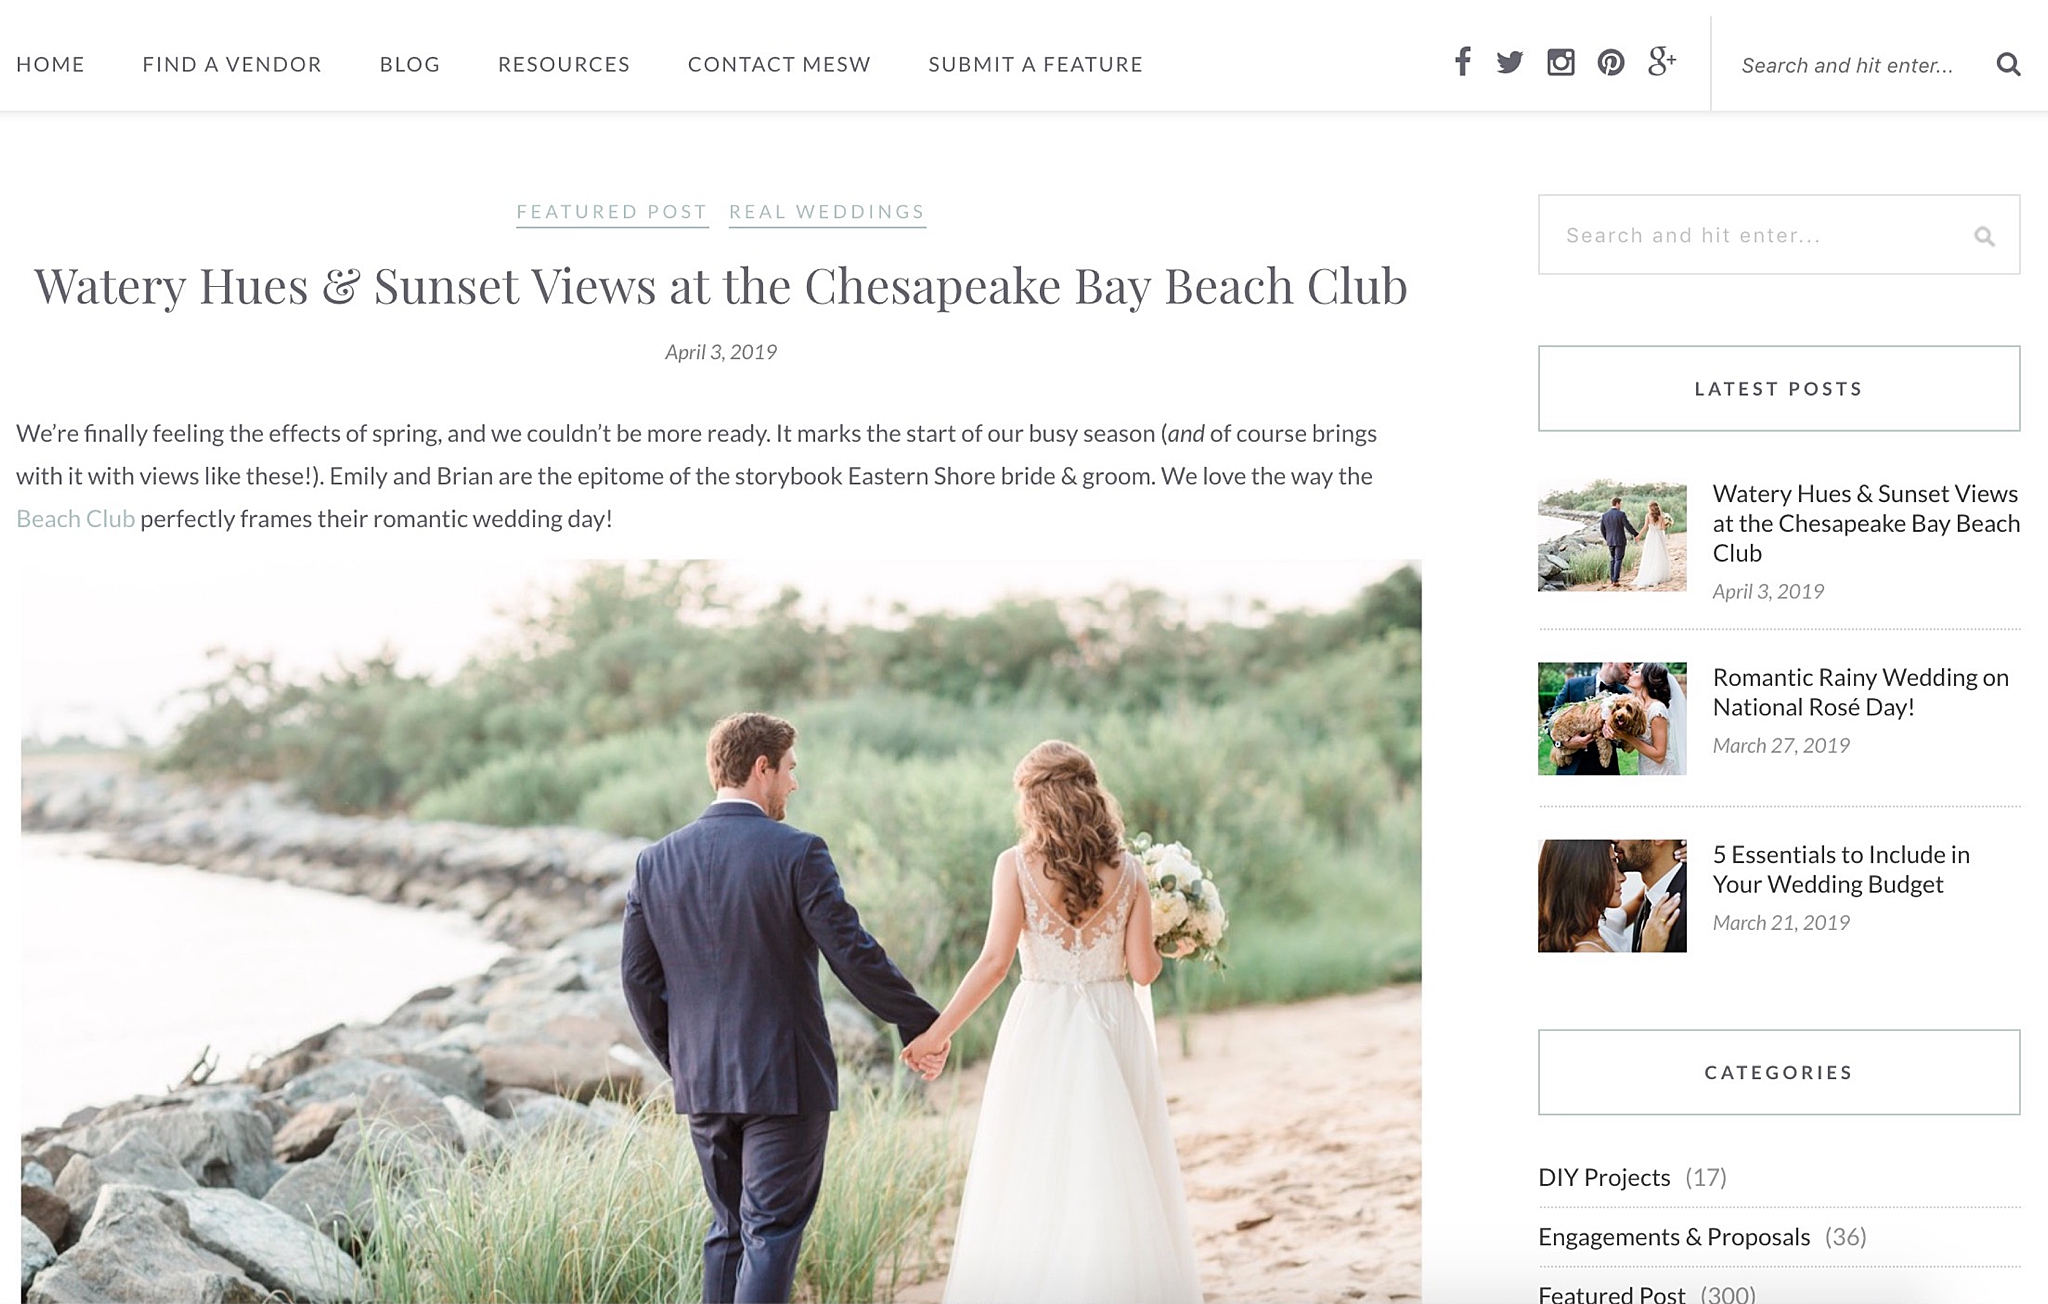 This chic Chesapeake Bay Beach Club wedding in Stevensville, MD is featured on My Eastern Shore Wedding blog.